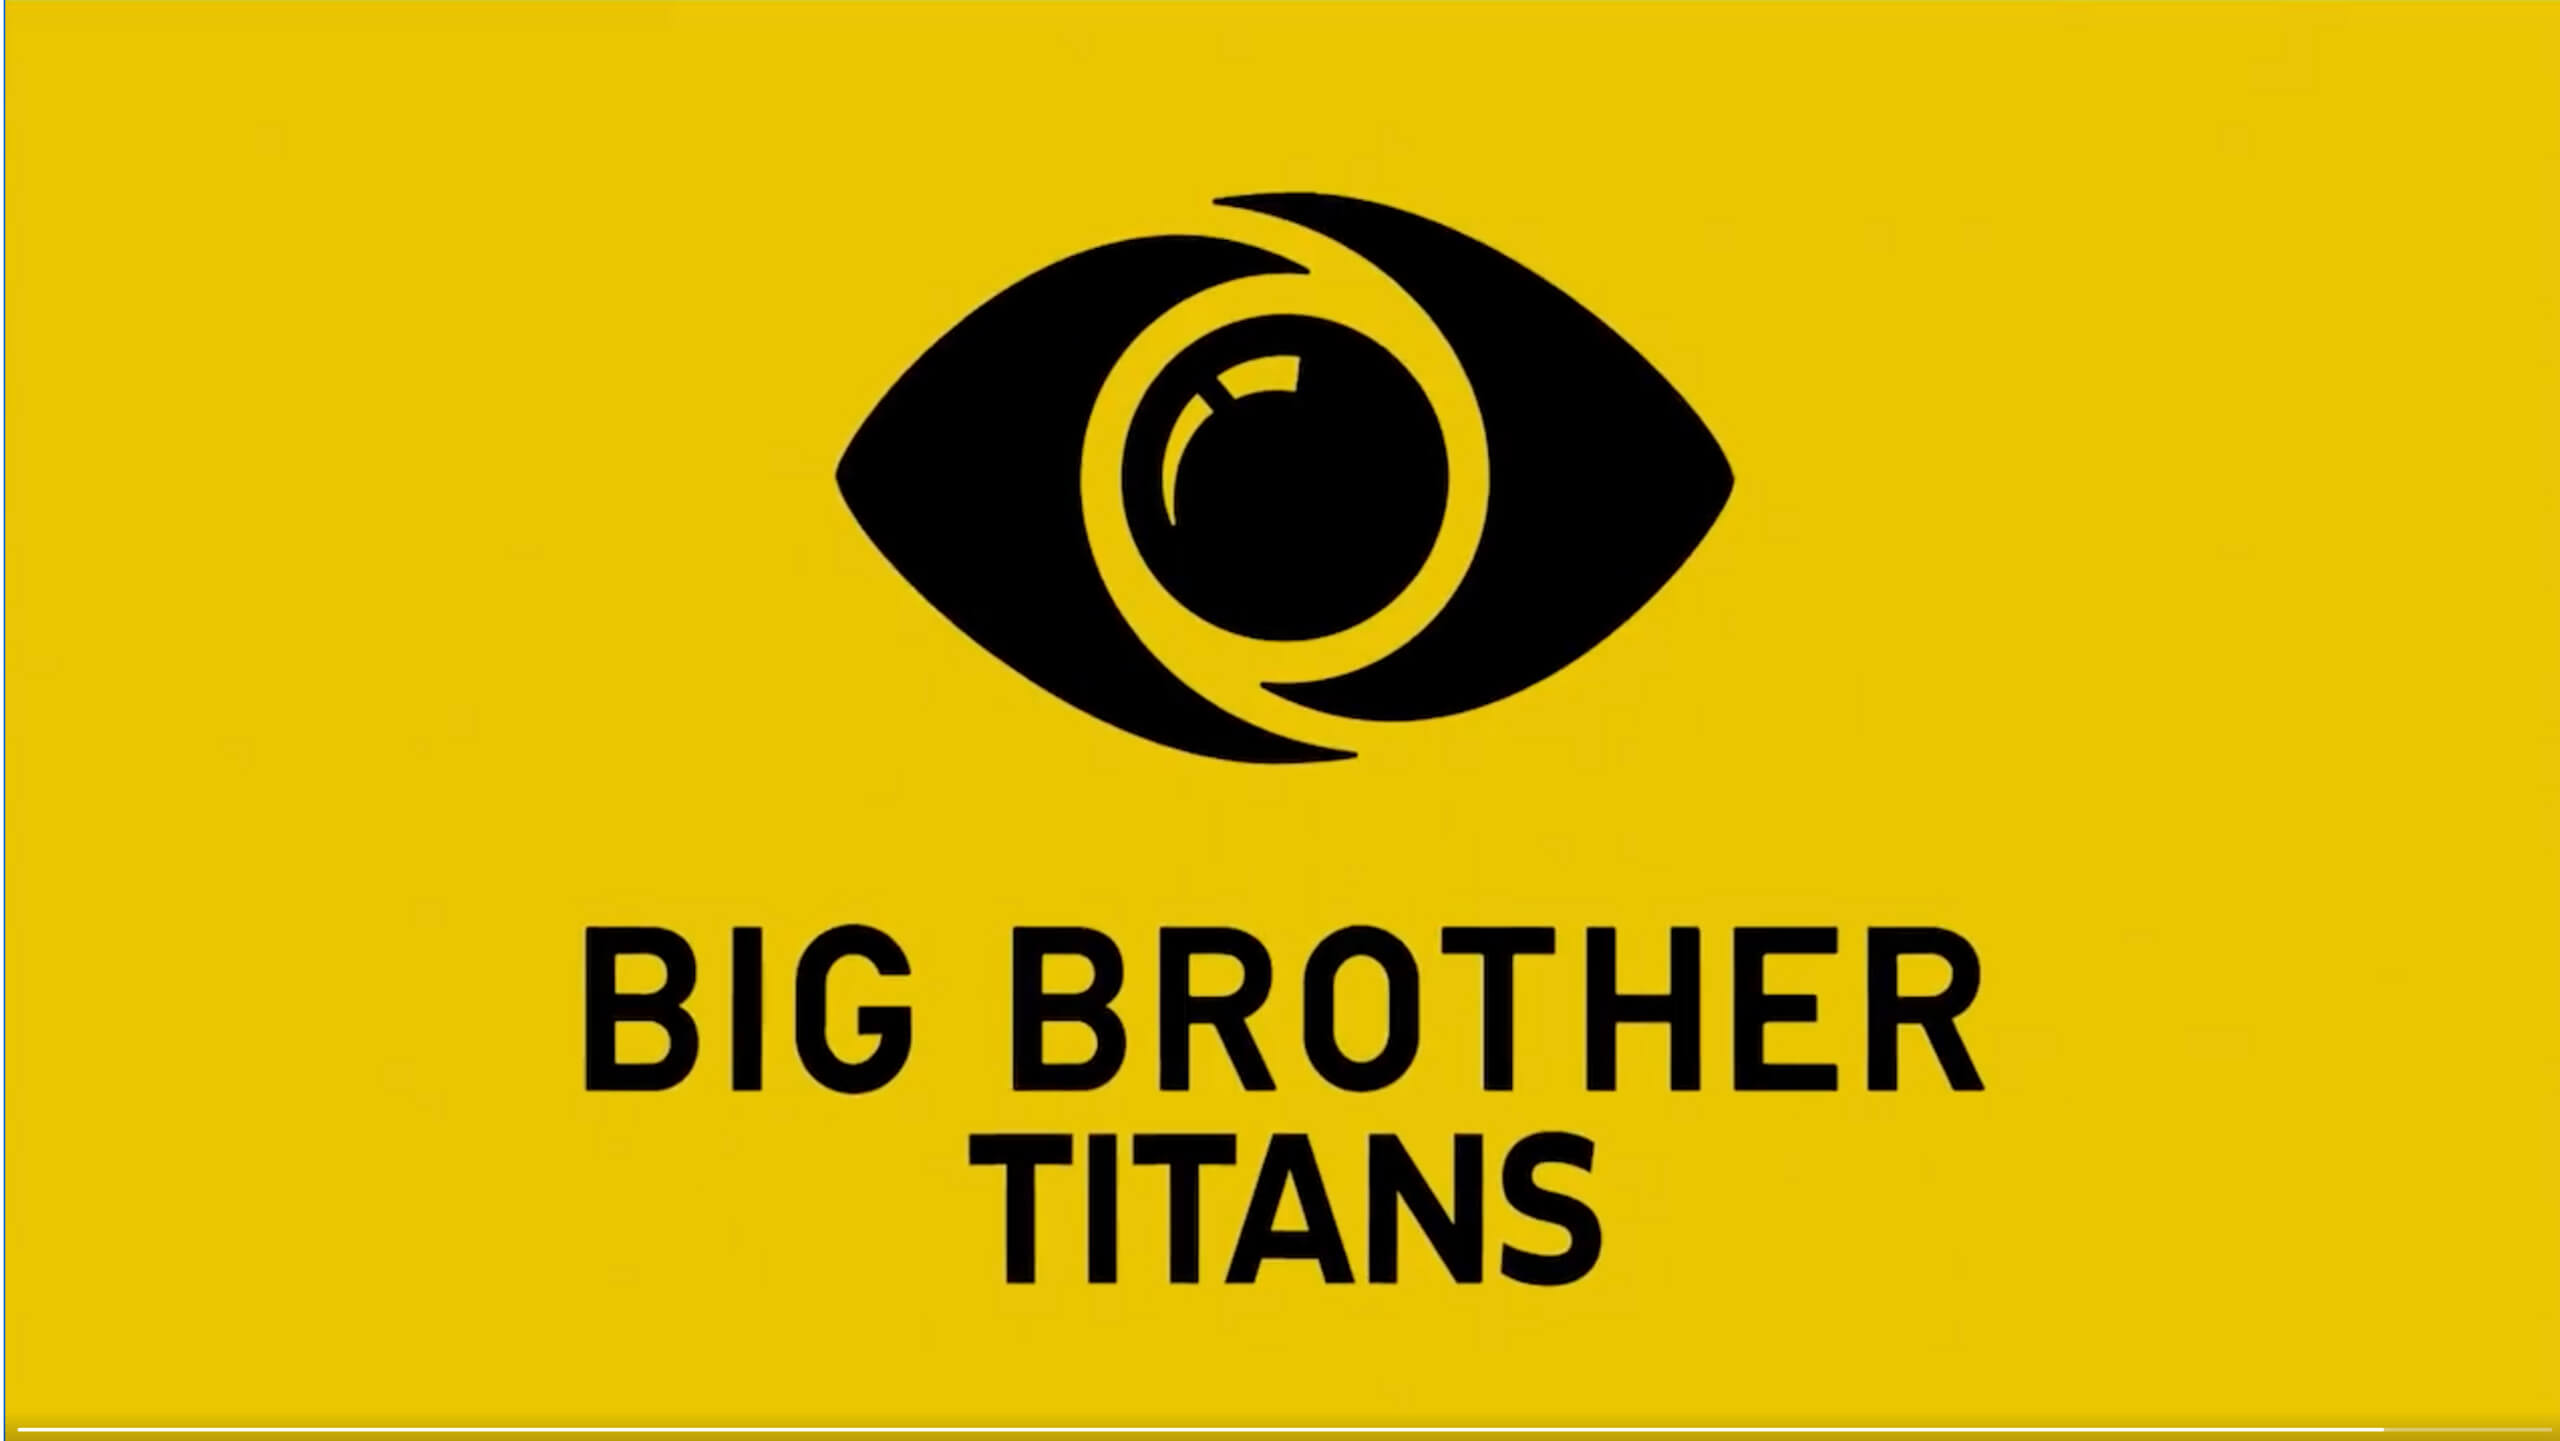 How to Apply for Big Brother Naija Titans Audition 2023